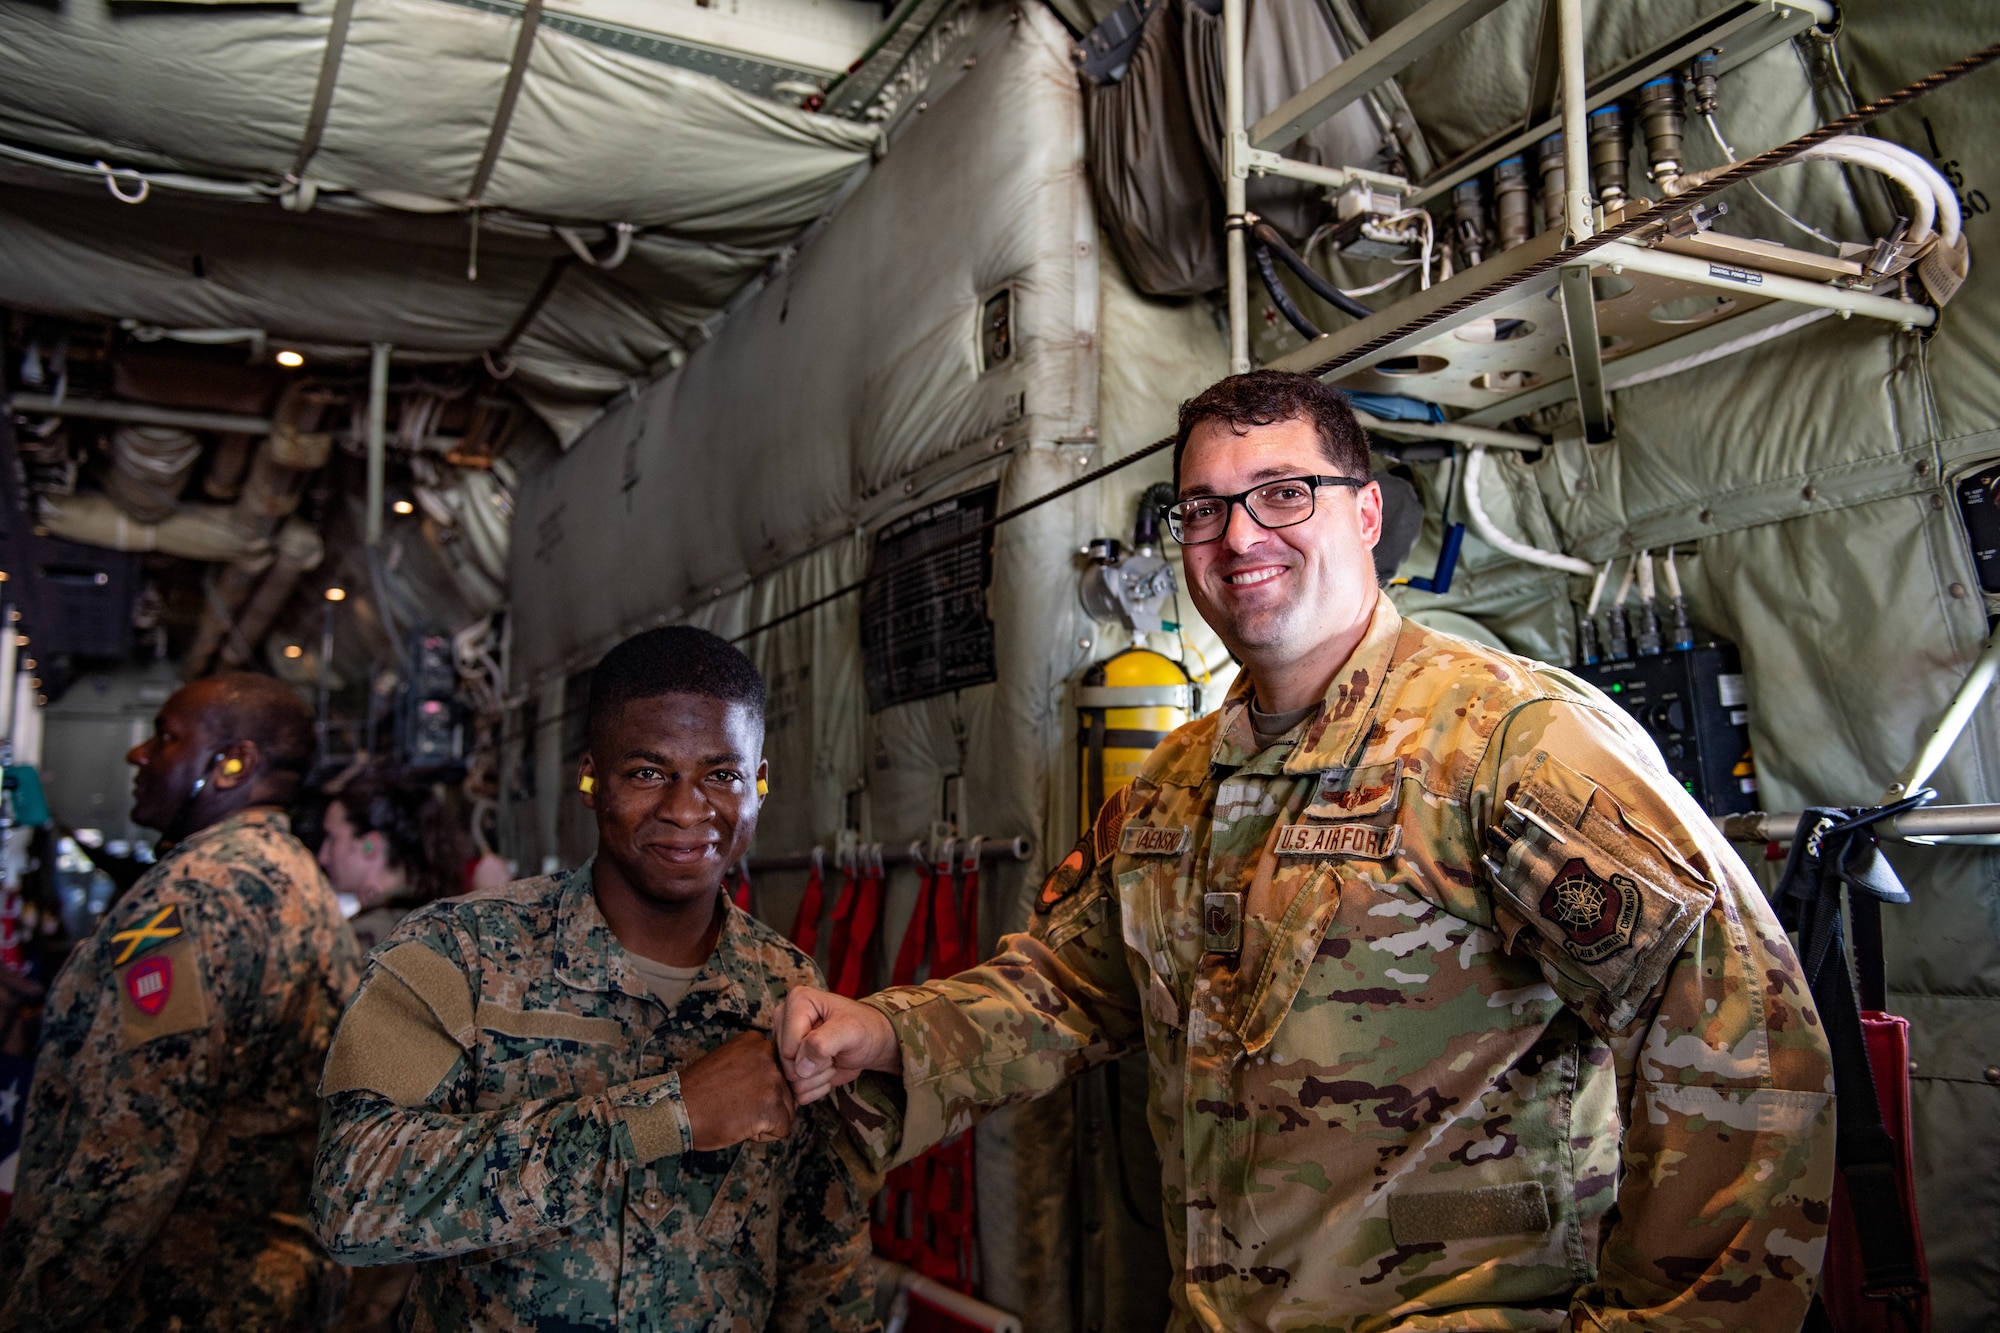 A U.S. Air Force loadmaster, right, and a Jamaican Defense Force member smile for a photo inside a C-130J Super Hercules at the Norman Manley International Airport near Kingston Jamaica, Feb. 28, 2023. U.S., Jamaican and Canadian forces came together to ensure when disaster strikes, they will be able to integrate forces and work together to provide life-saving aid and support throughout the Caribbean. (U.S. Air Force photo by Airman 1st Class Courtney Sebastianelli)